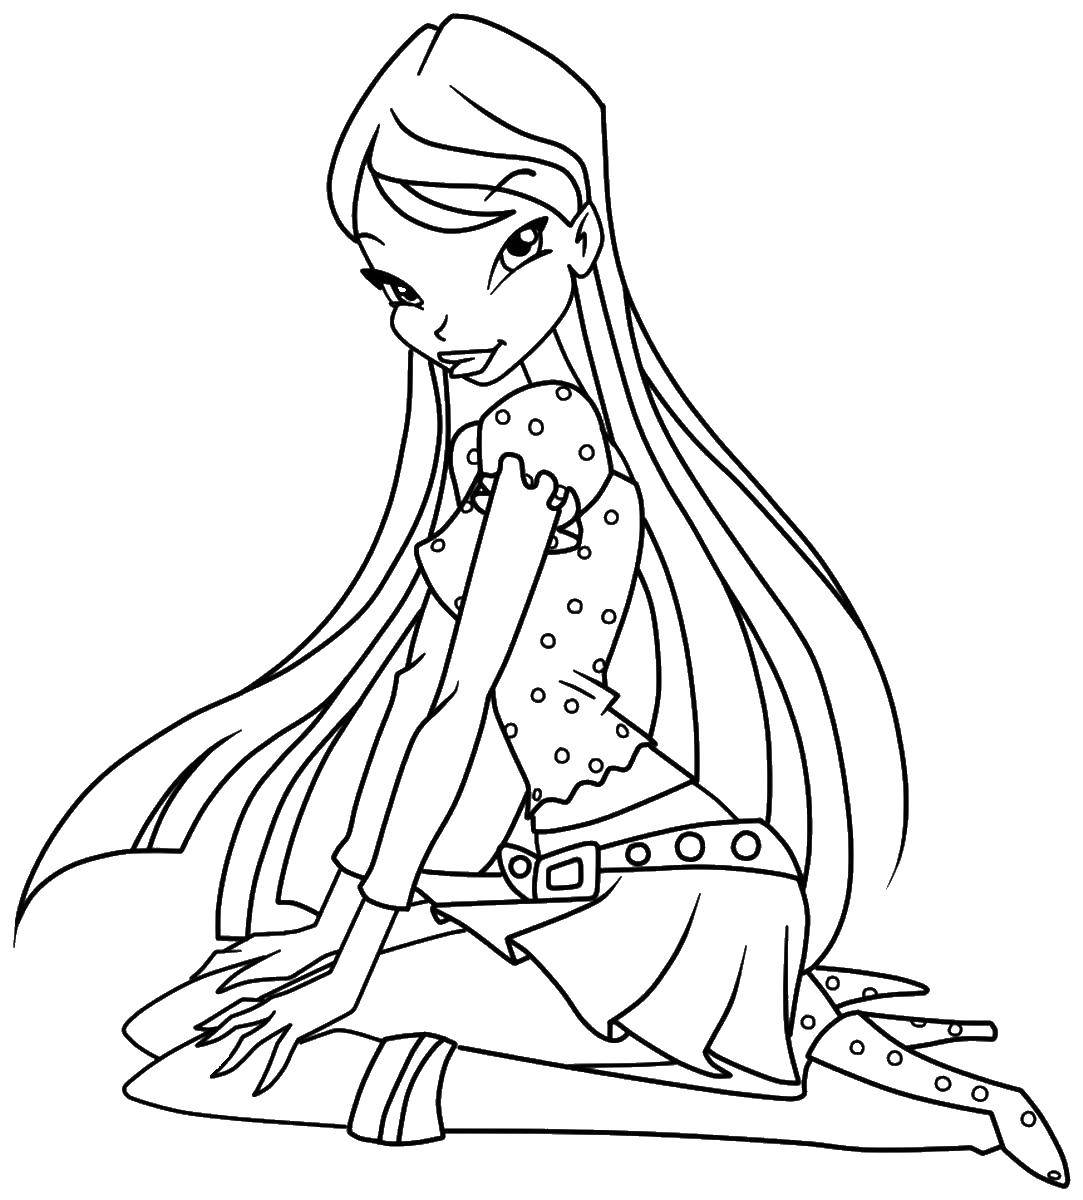 Coloring Stella loves speckled. Category Winx. Tags:  Character cartoon, Winx.